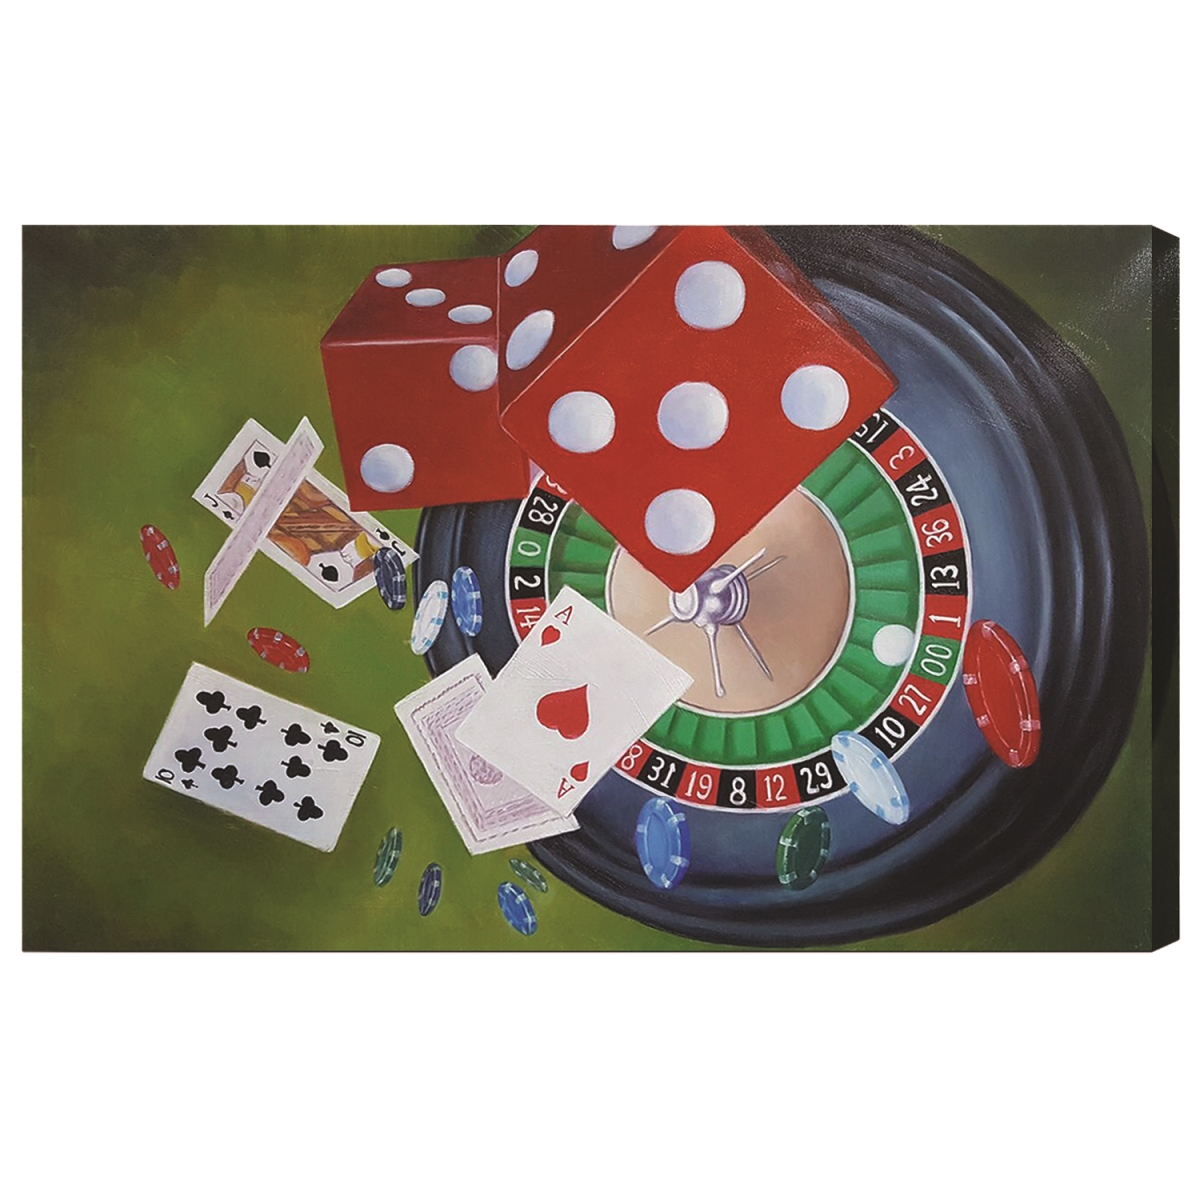 Picture of RAM Game Room OP9 36 x 24 in. Roulette & Dice Oil Painting on Canvas